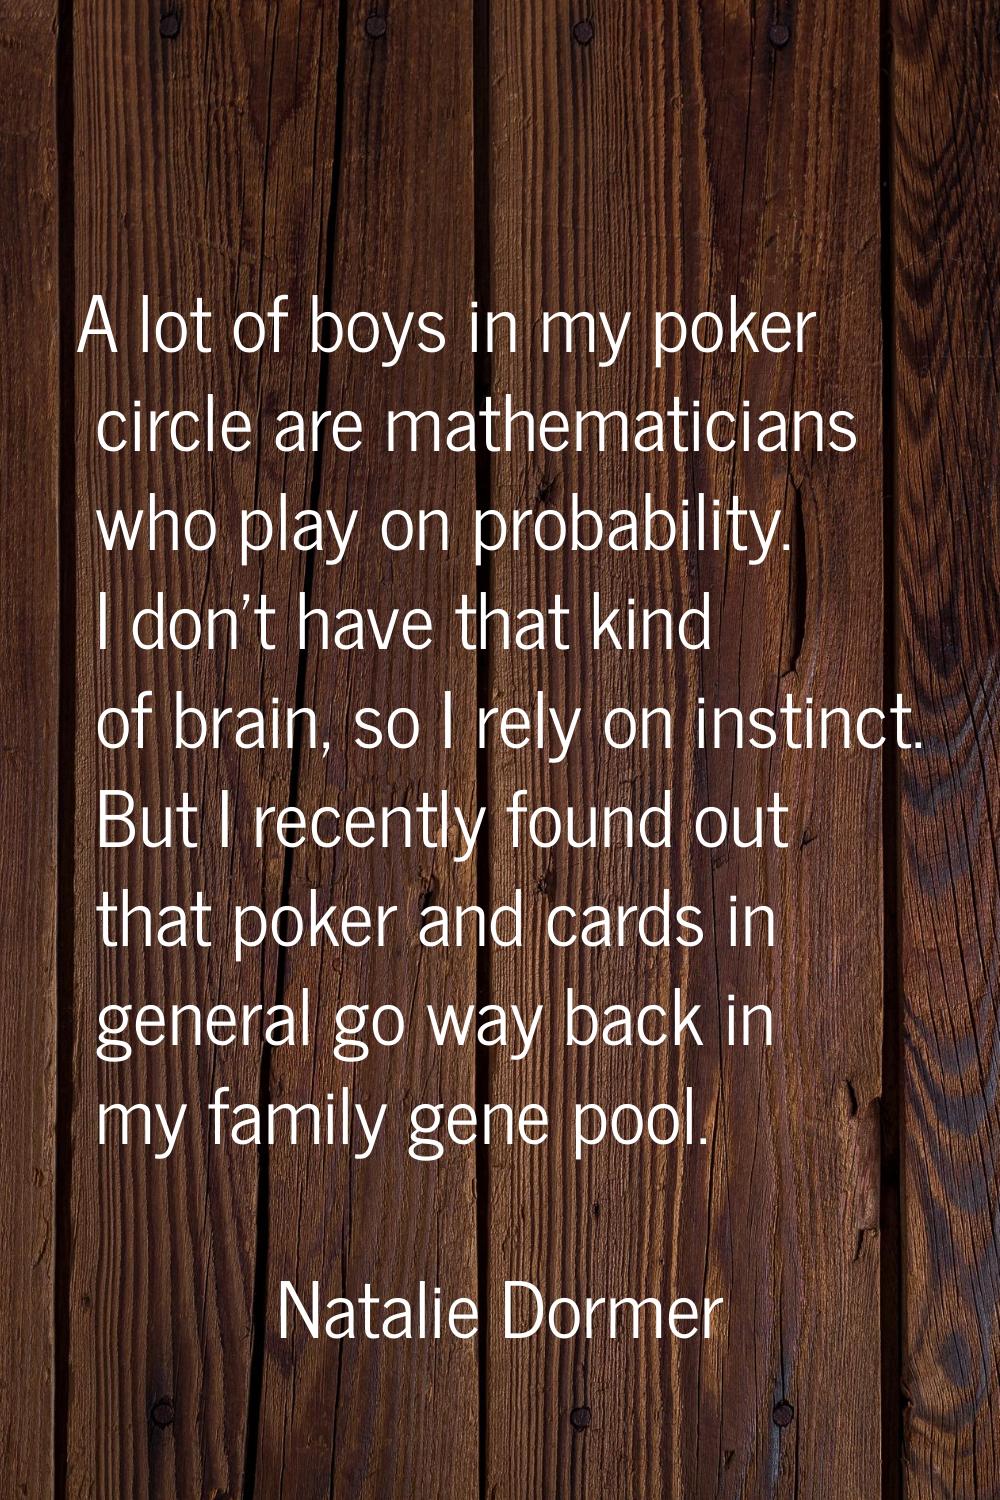 A lot of boys in my poker circle are mathematicians who play on probability. I don't have that kind